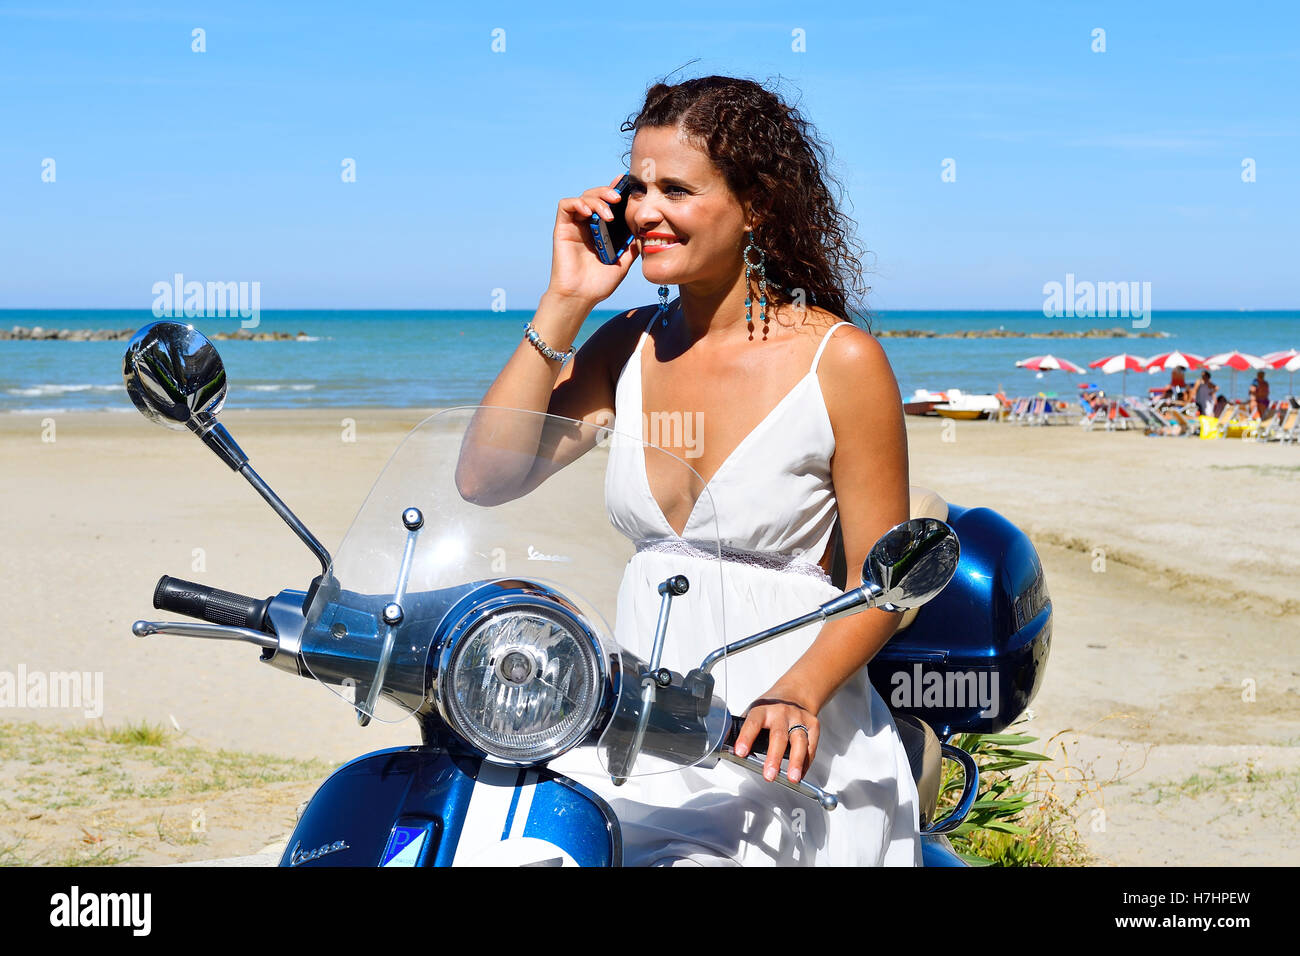 Woman in white dress and decorative earrings with cell phone on Vespa Primavera scooter on the beach, Senigallia, Adriatic Coast Stock Photo